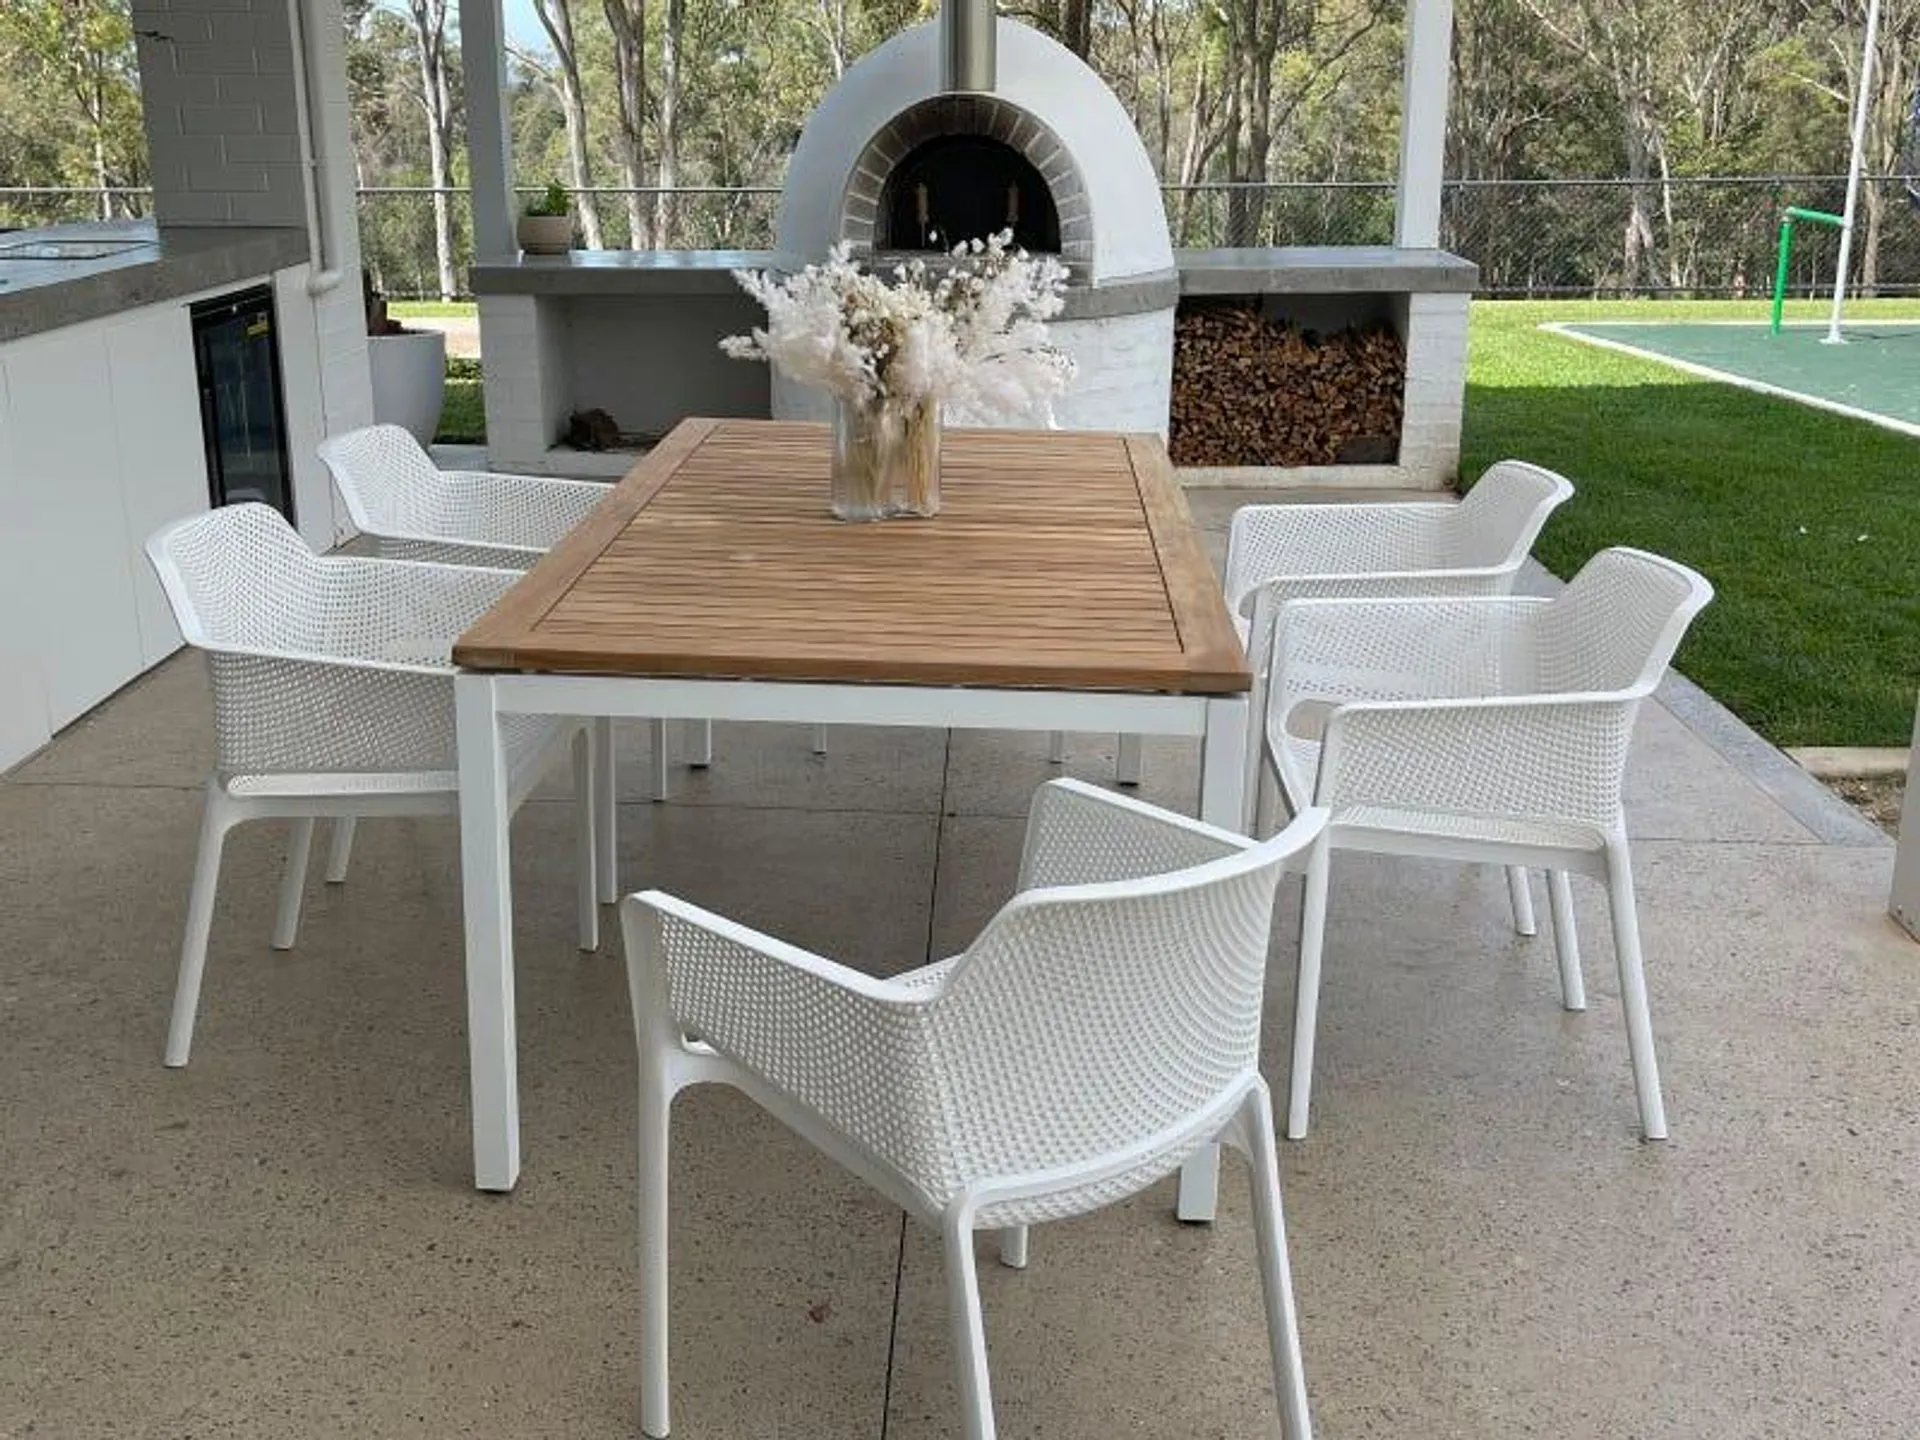 Barcelona Table with Bailey Chairs 7pc Outdoor Dining Setting